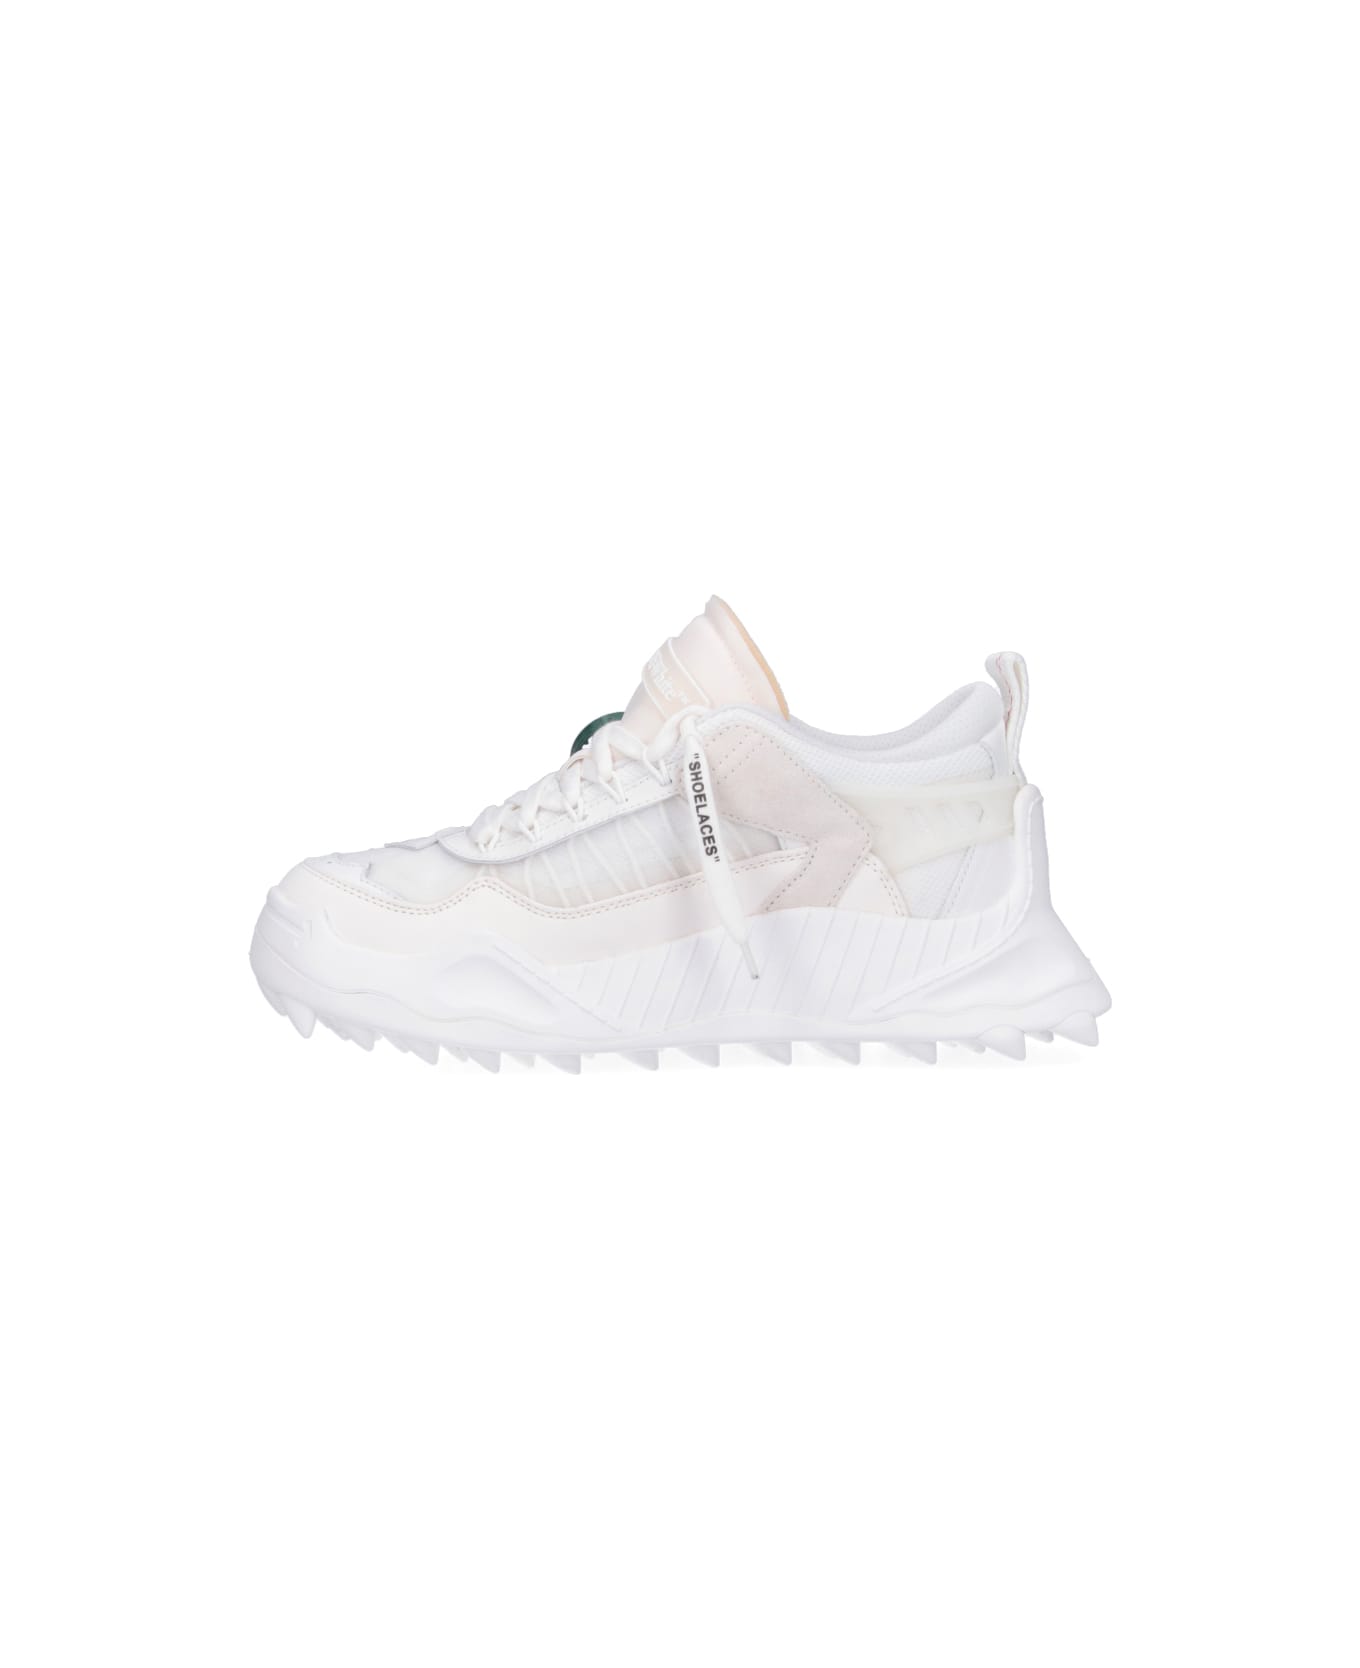 Off-White Odsy 1000 Sneakers In White Leather And Fabric Blend - White White スニーカー